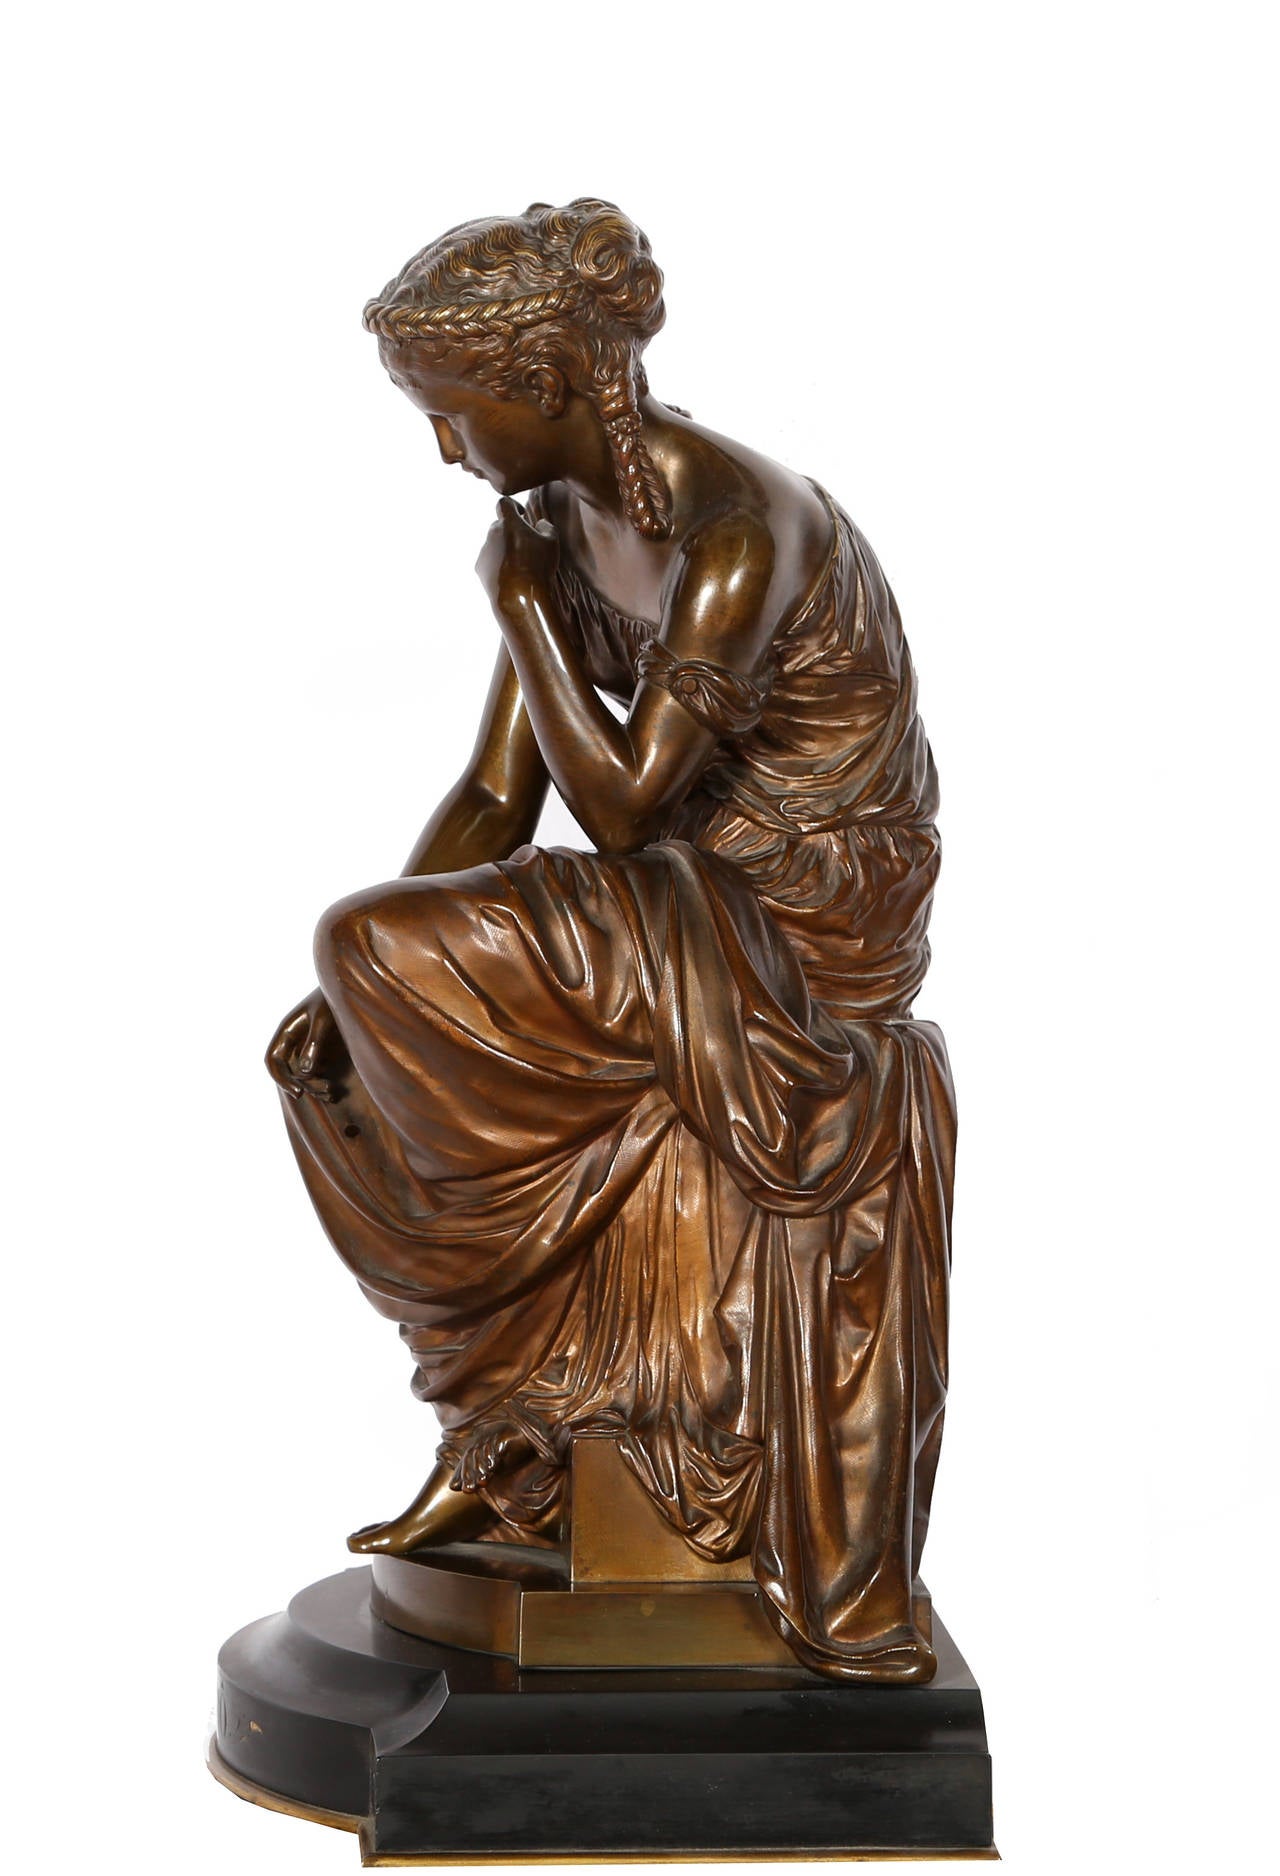 Artist: Hippolyte Moreau, French (1832 - 1927)
Title: Hero
Medium: Bronze Sculpture on Marble Base, signature inscribed
Size: 19 x 11 x 9 in. (48.26 x 27.94 x 22.86 cm)

The tale of Hero and Leander is one of Greek mythology's most tragic love